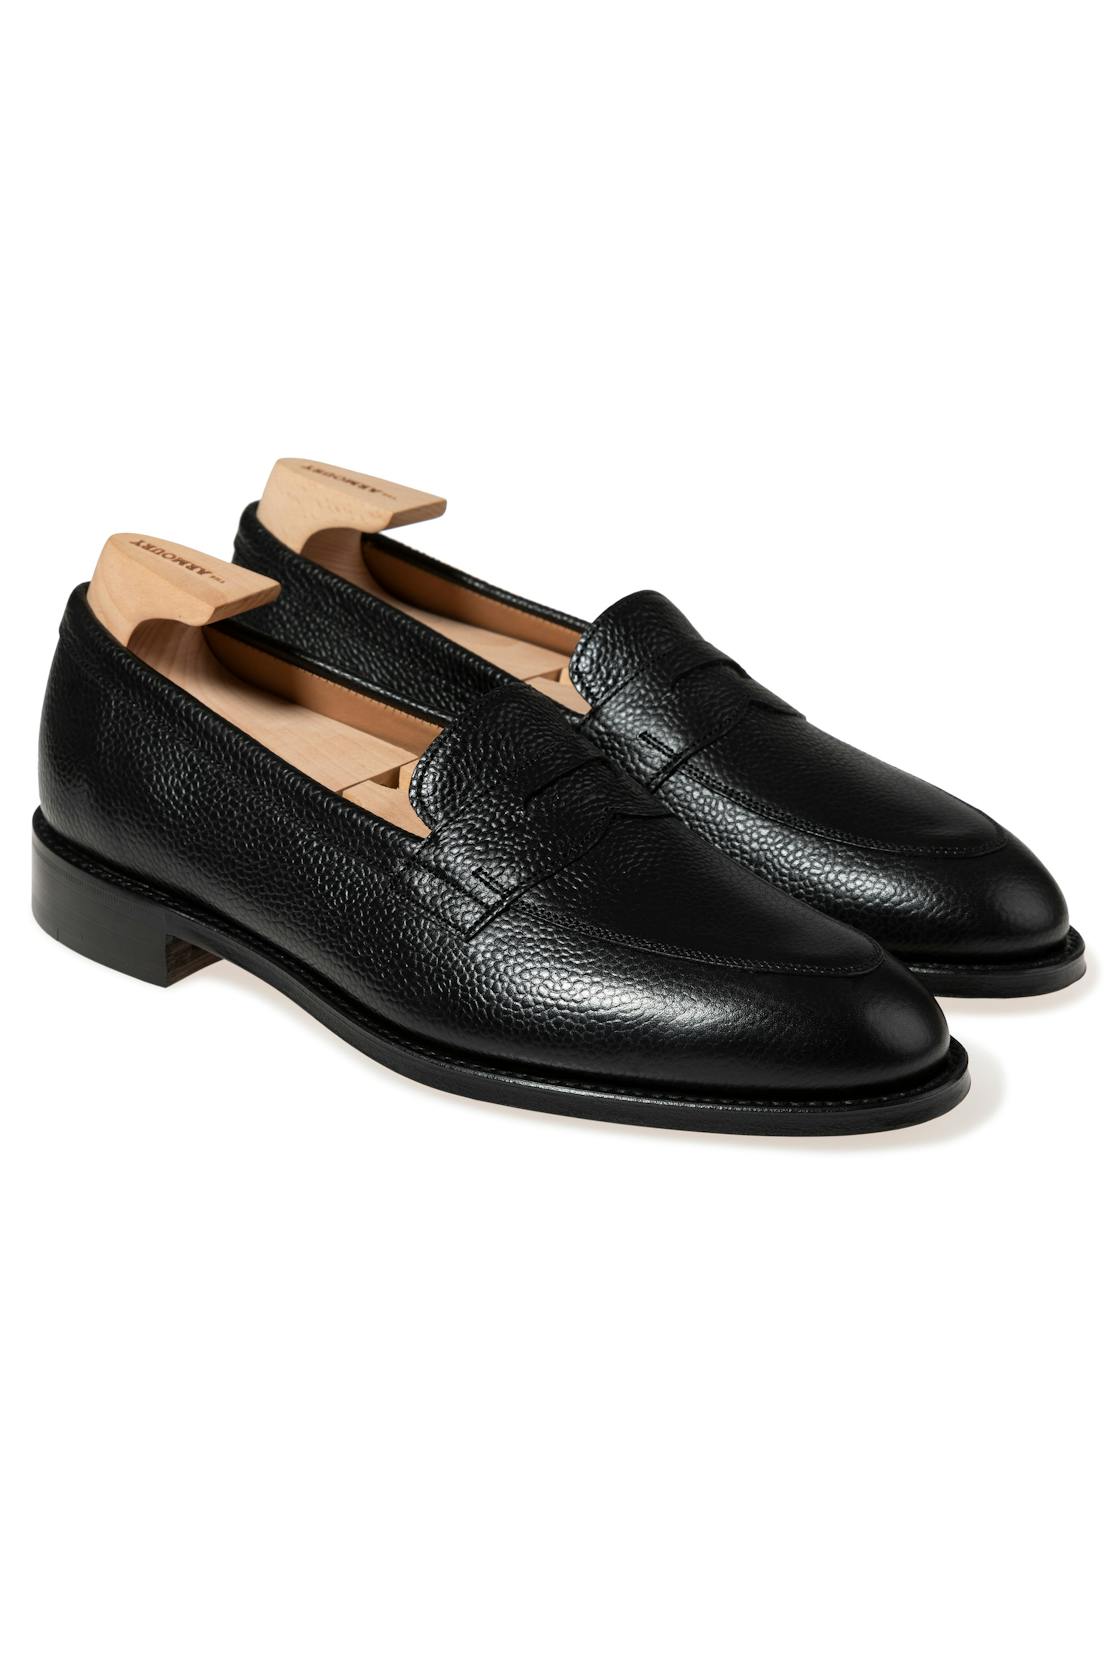 The Armoury Duane II Black Grained Calf Penny Loafers *factory seconds*